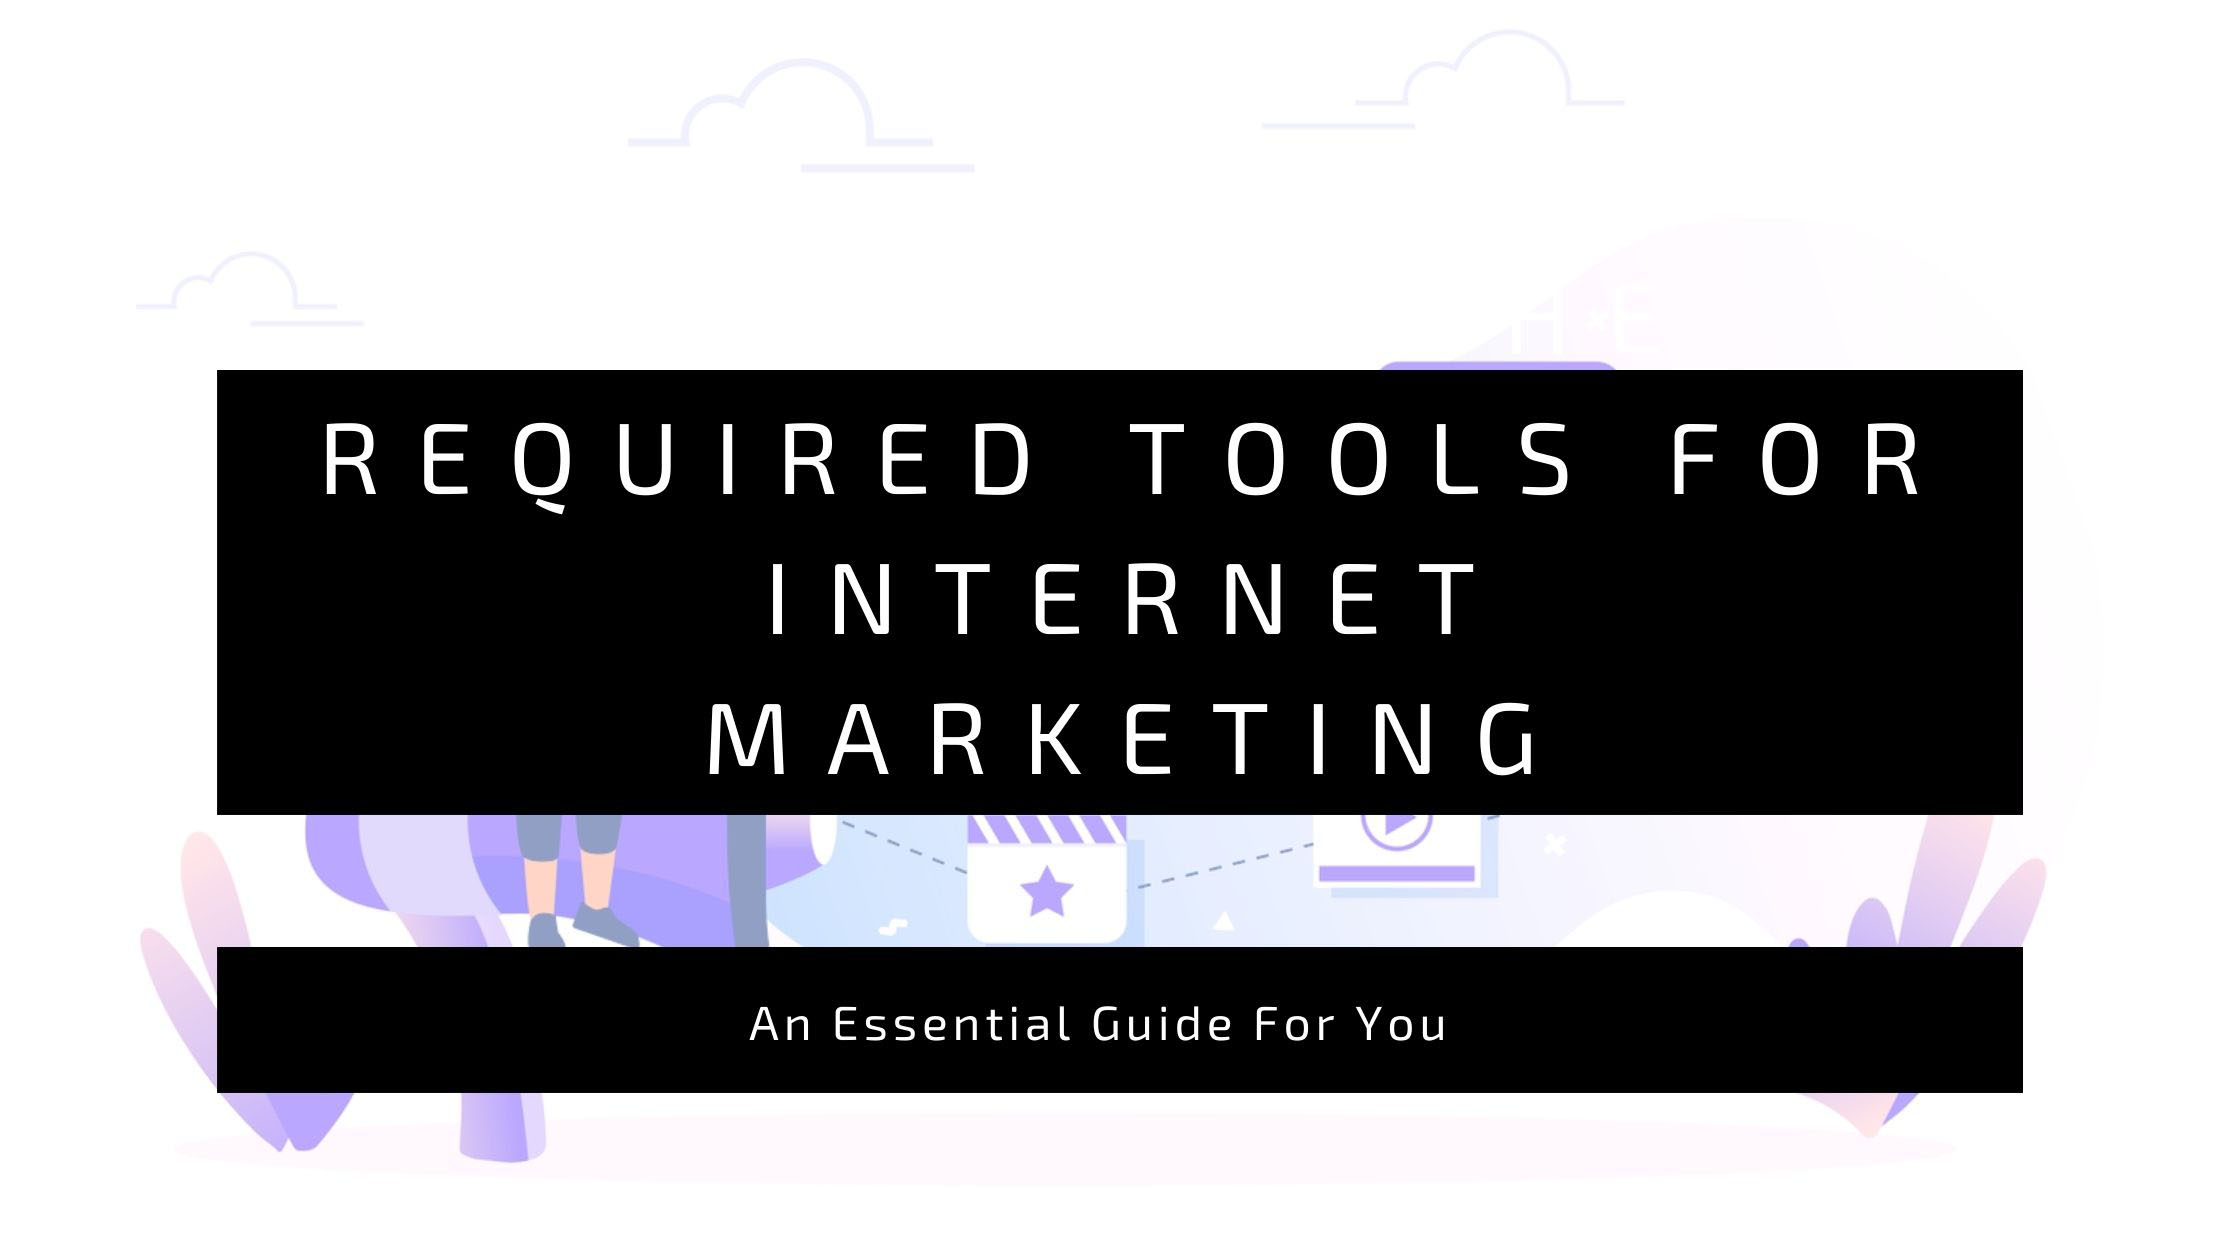 Tools for Internet Marketing